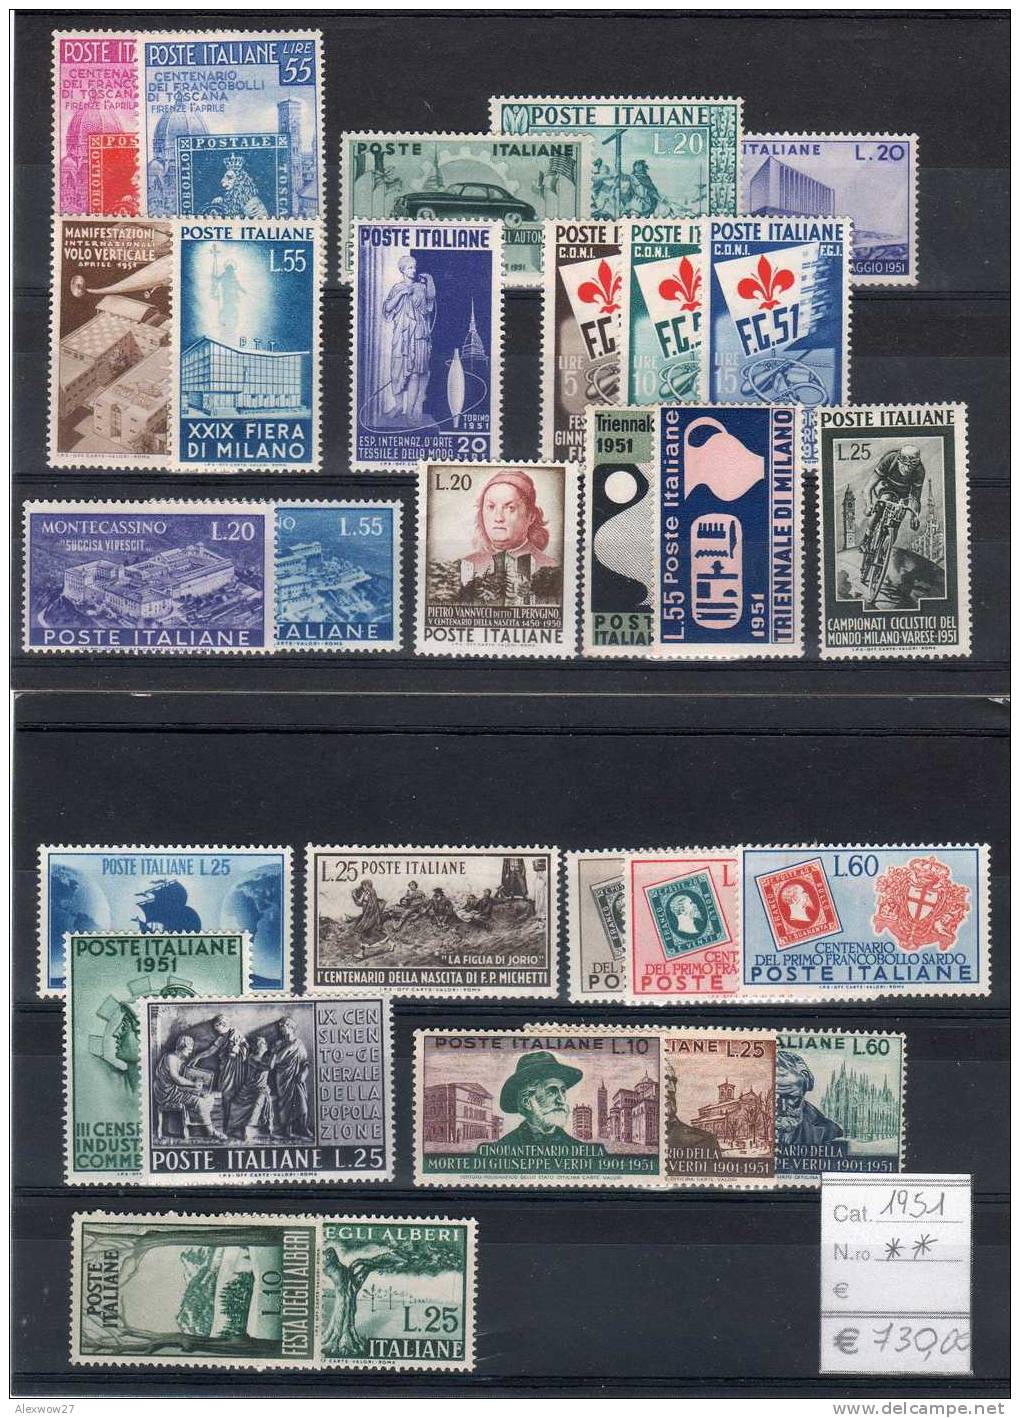 ITALIA / ITALY 1951 --ANNATA COMPLETA -- YEARS COMPLETE ** MNH ..LUX - Full Years